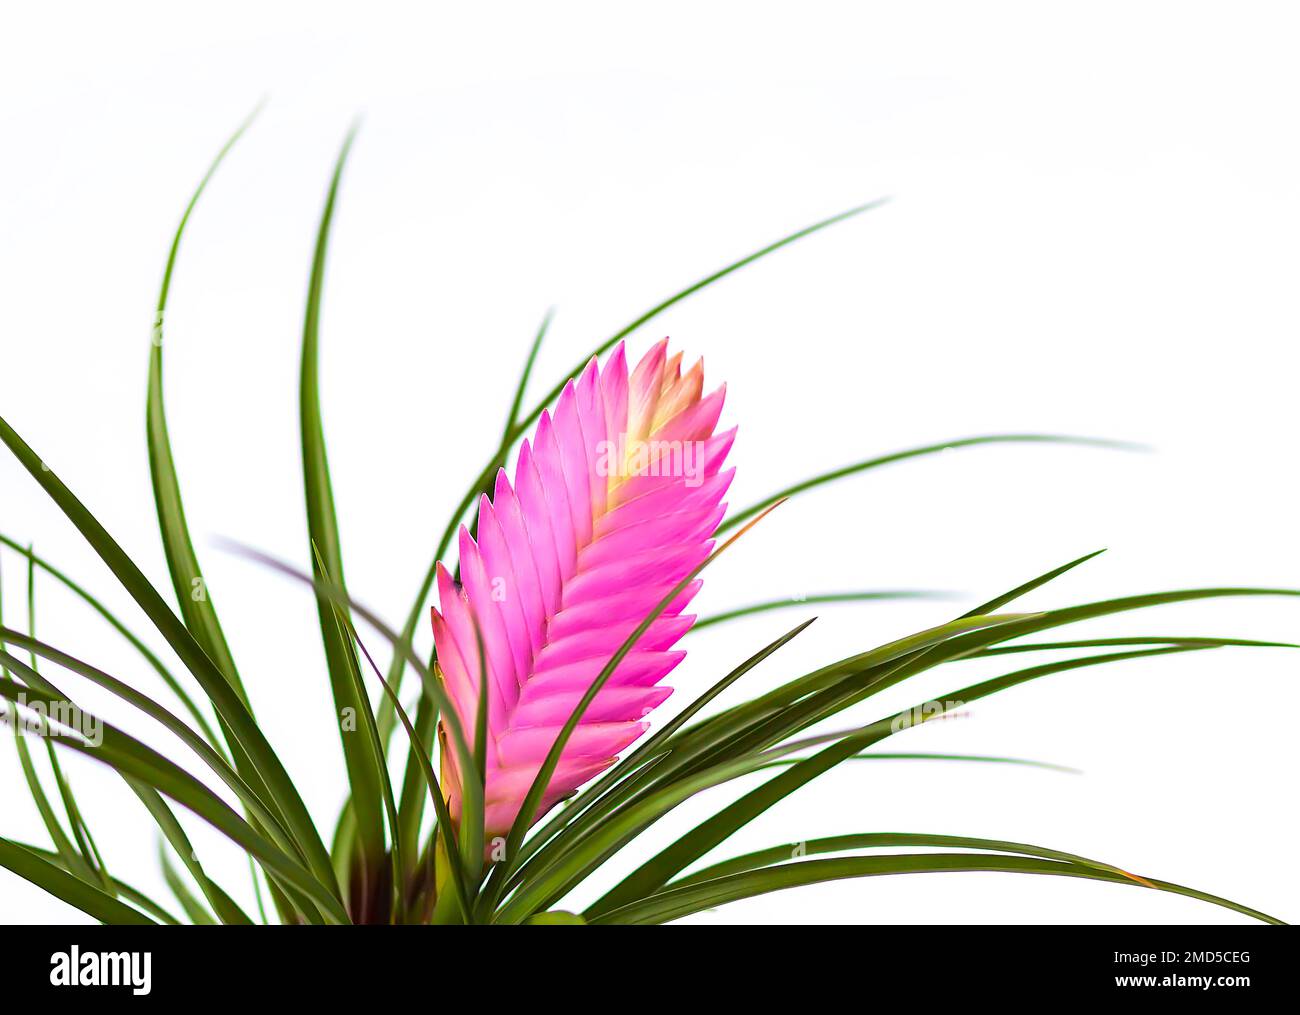 Blooming pink flower or Tillandsia cyanea house plant. Stock Photo